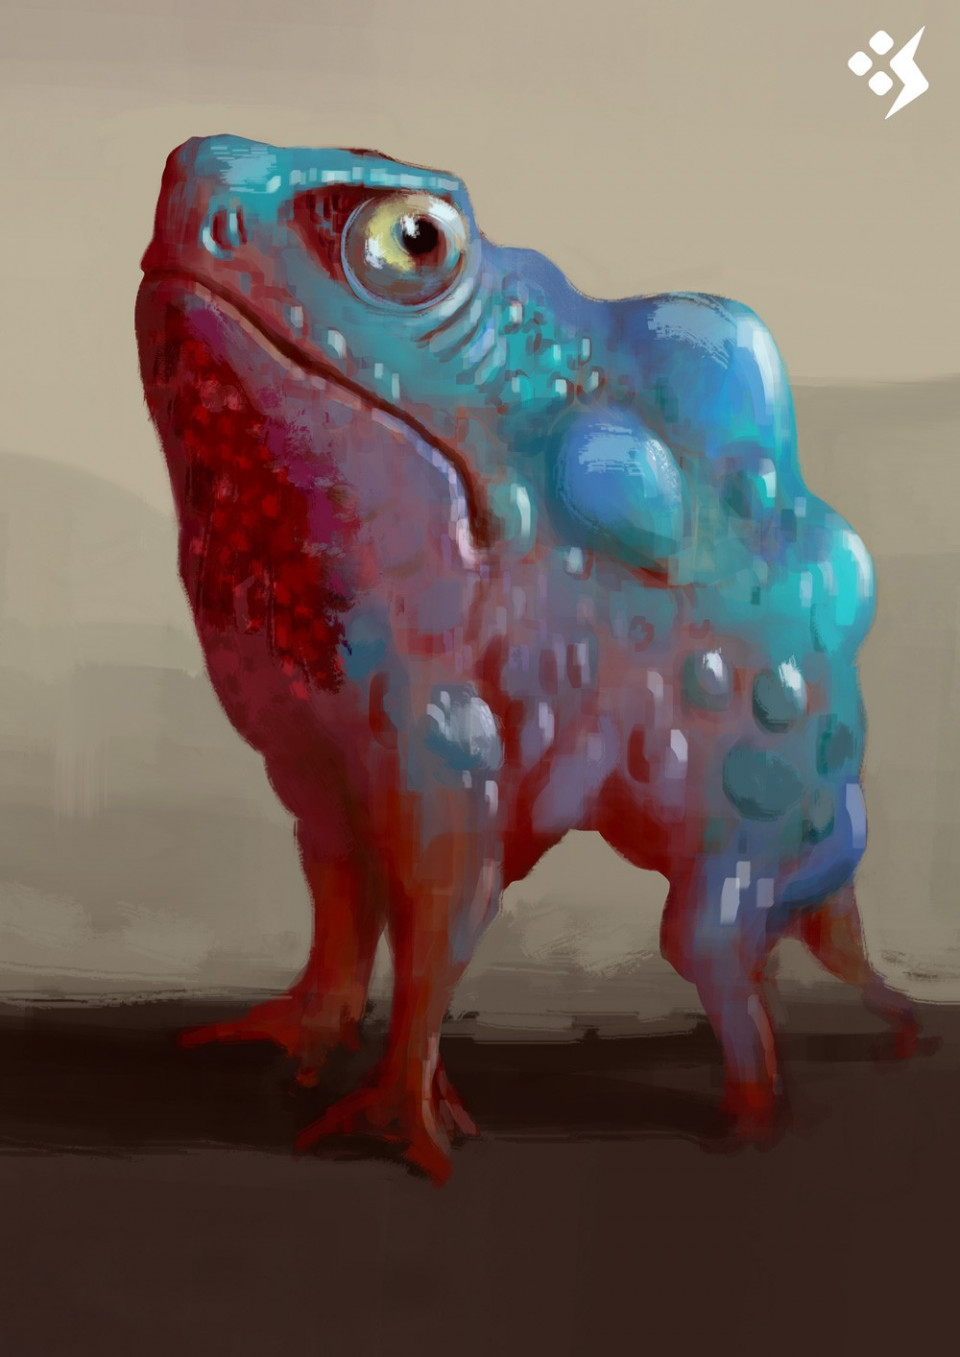 Creature designs inspired by Concept Start